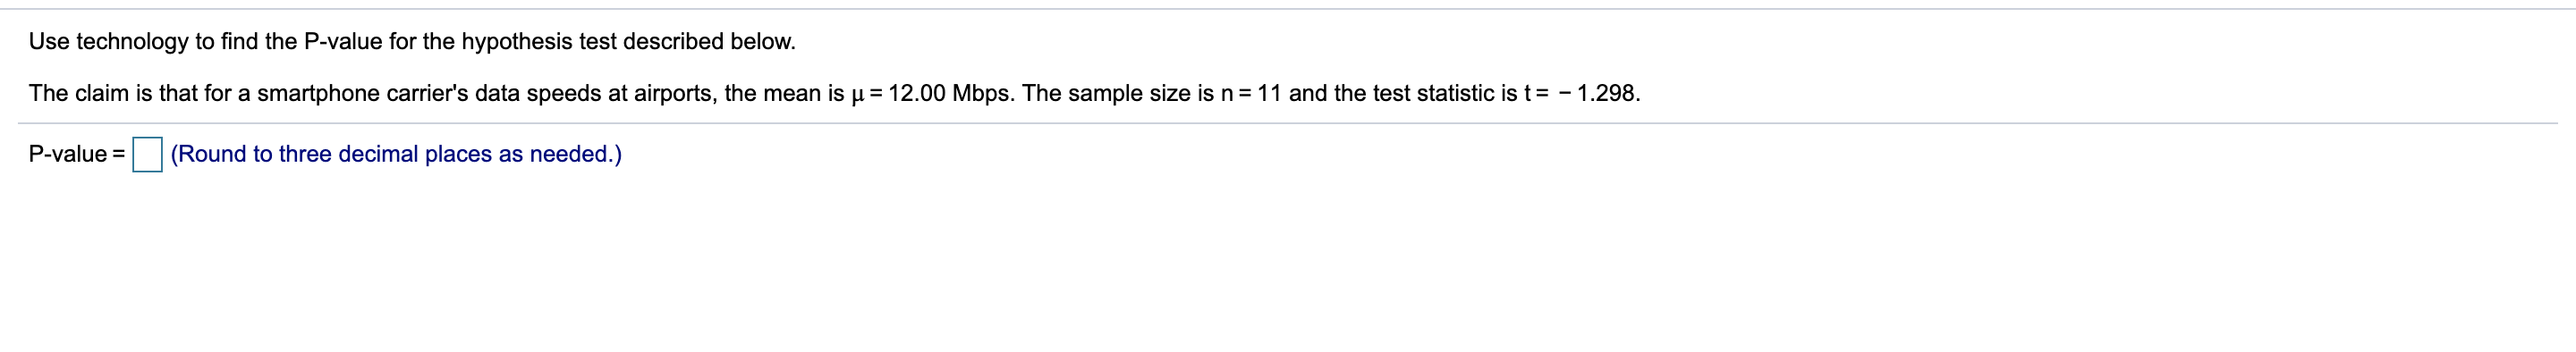 Use technology to find the P-value for the hypothesis test described below.
The claim is that for a smartphone carrier's data speeds at airports, the mean is u = 12.00 Mbps. The sample size isn=11 and the test statistic is t= - 1.298.
(Round to three decimal places as needed.)
P-value =
